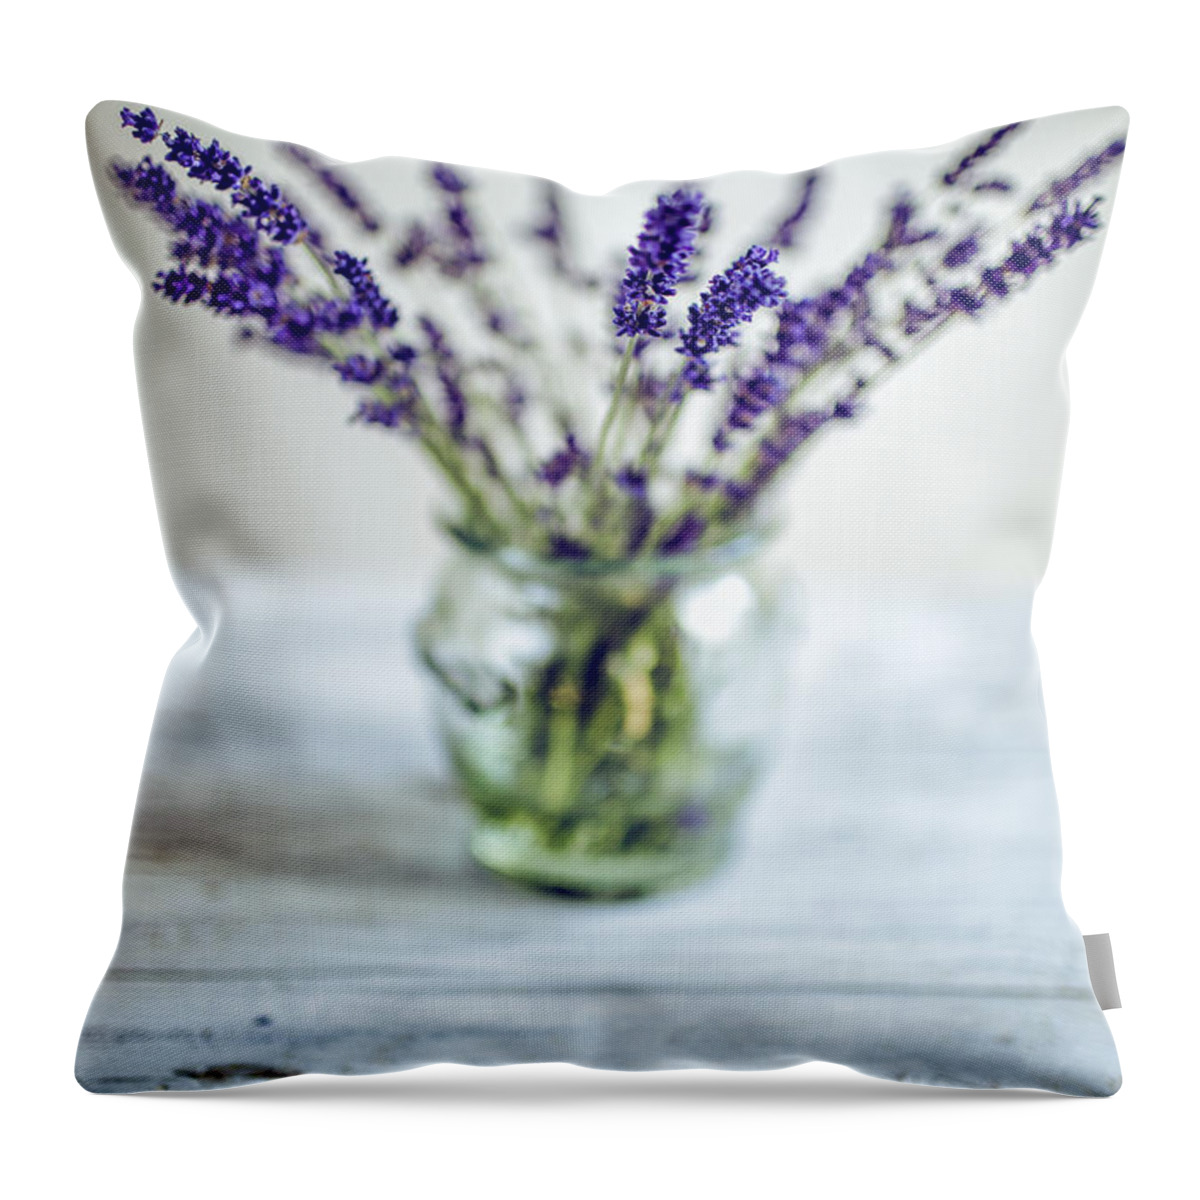 Lavender Throw Pillow featuring the photograph Lavender Still Life #1 by Nailia Schwarz